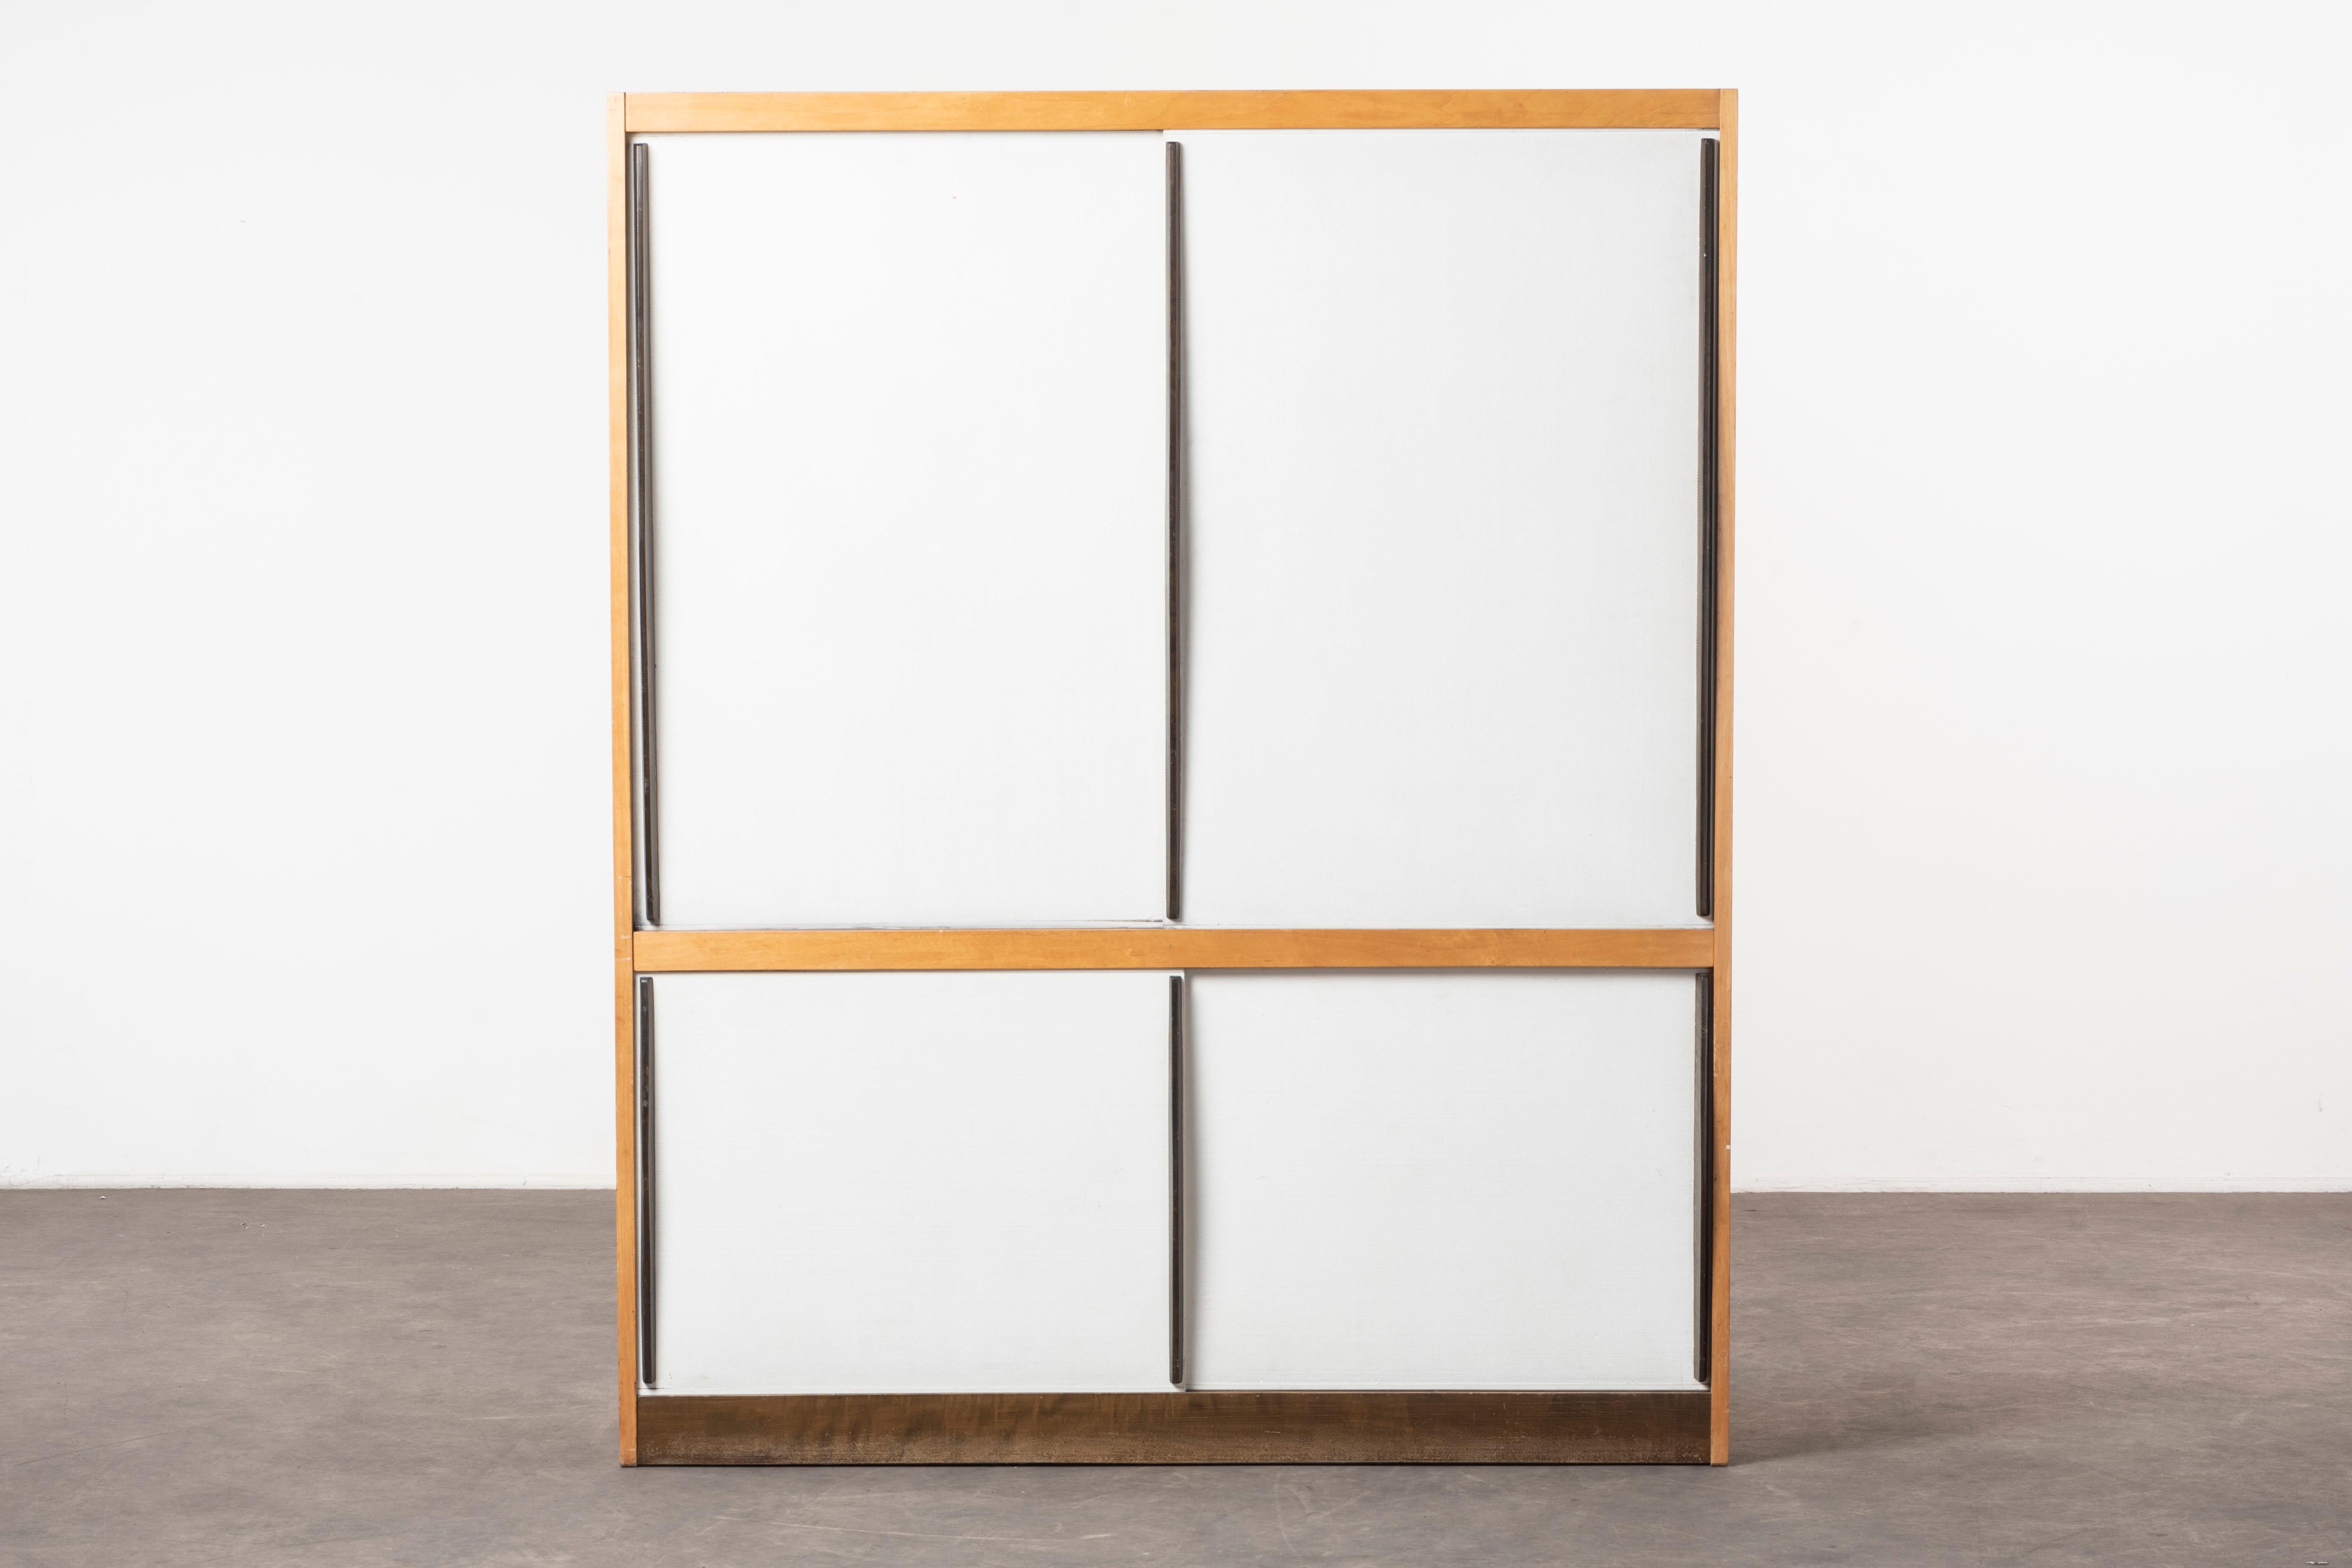 Cabinet by Hans Bellman,
Switzerland, 1946. Manufactured by Wohnbedarf. Birch wood structure, metal sliding doors. Measures: 120 x 45 x H 148 cm. 47.2 x D 17.7 x H 58.2 in.
Please note: Prices do not include VAT. VAT may be applied depending on